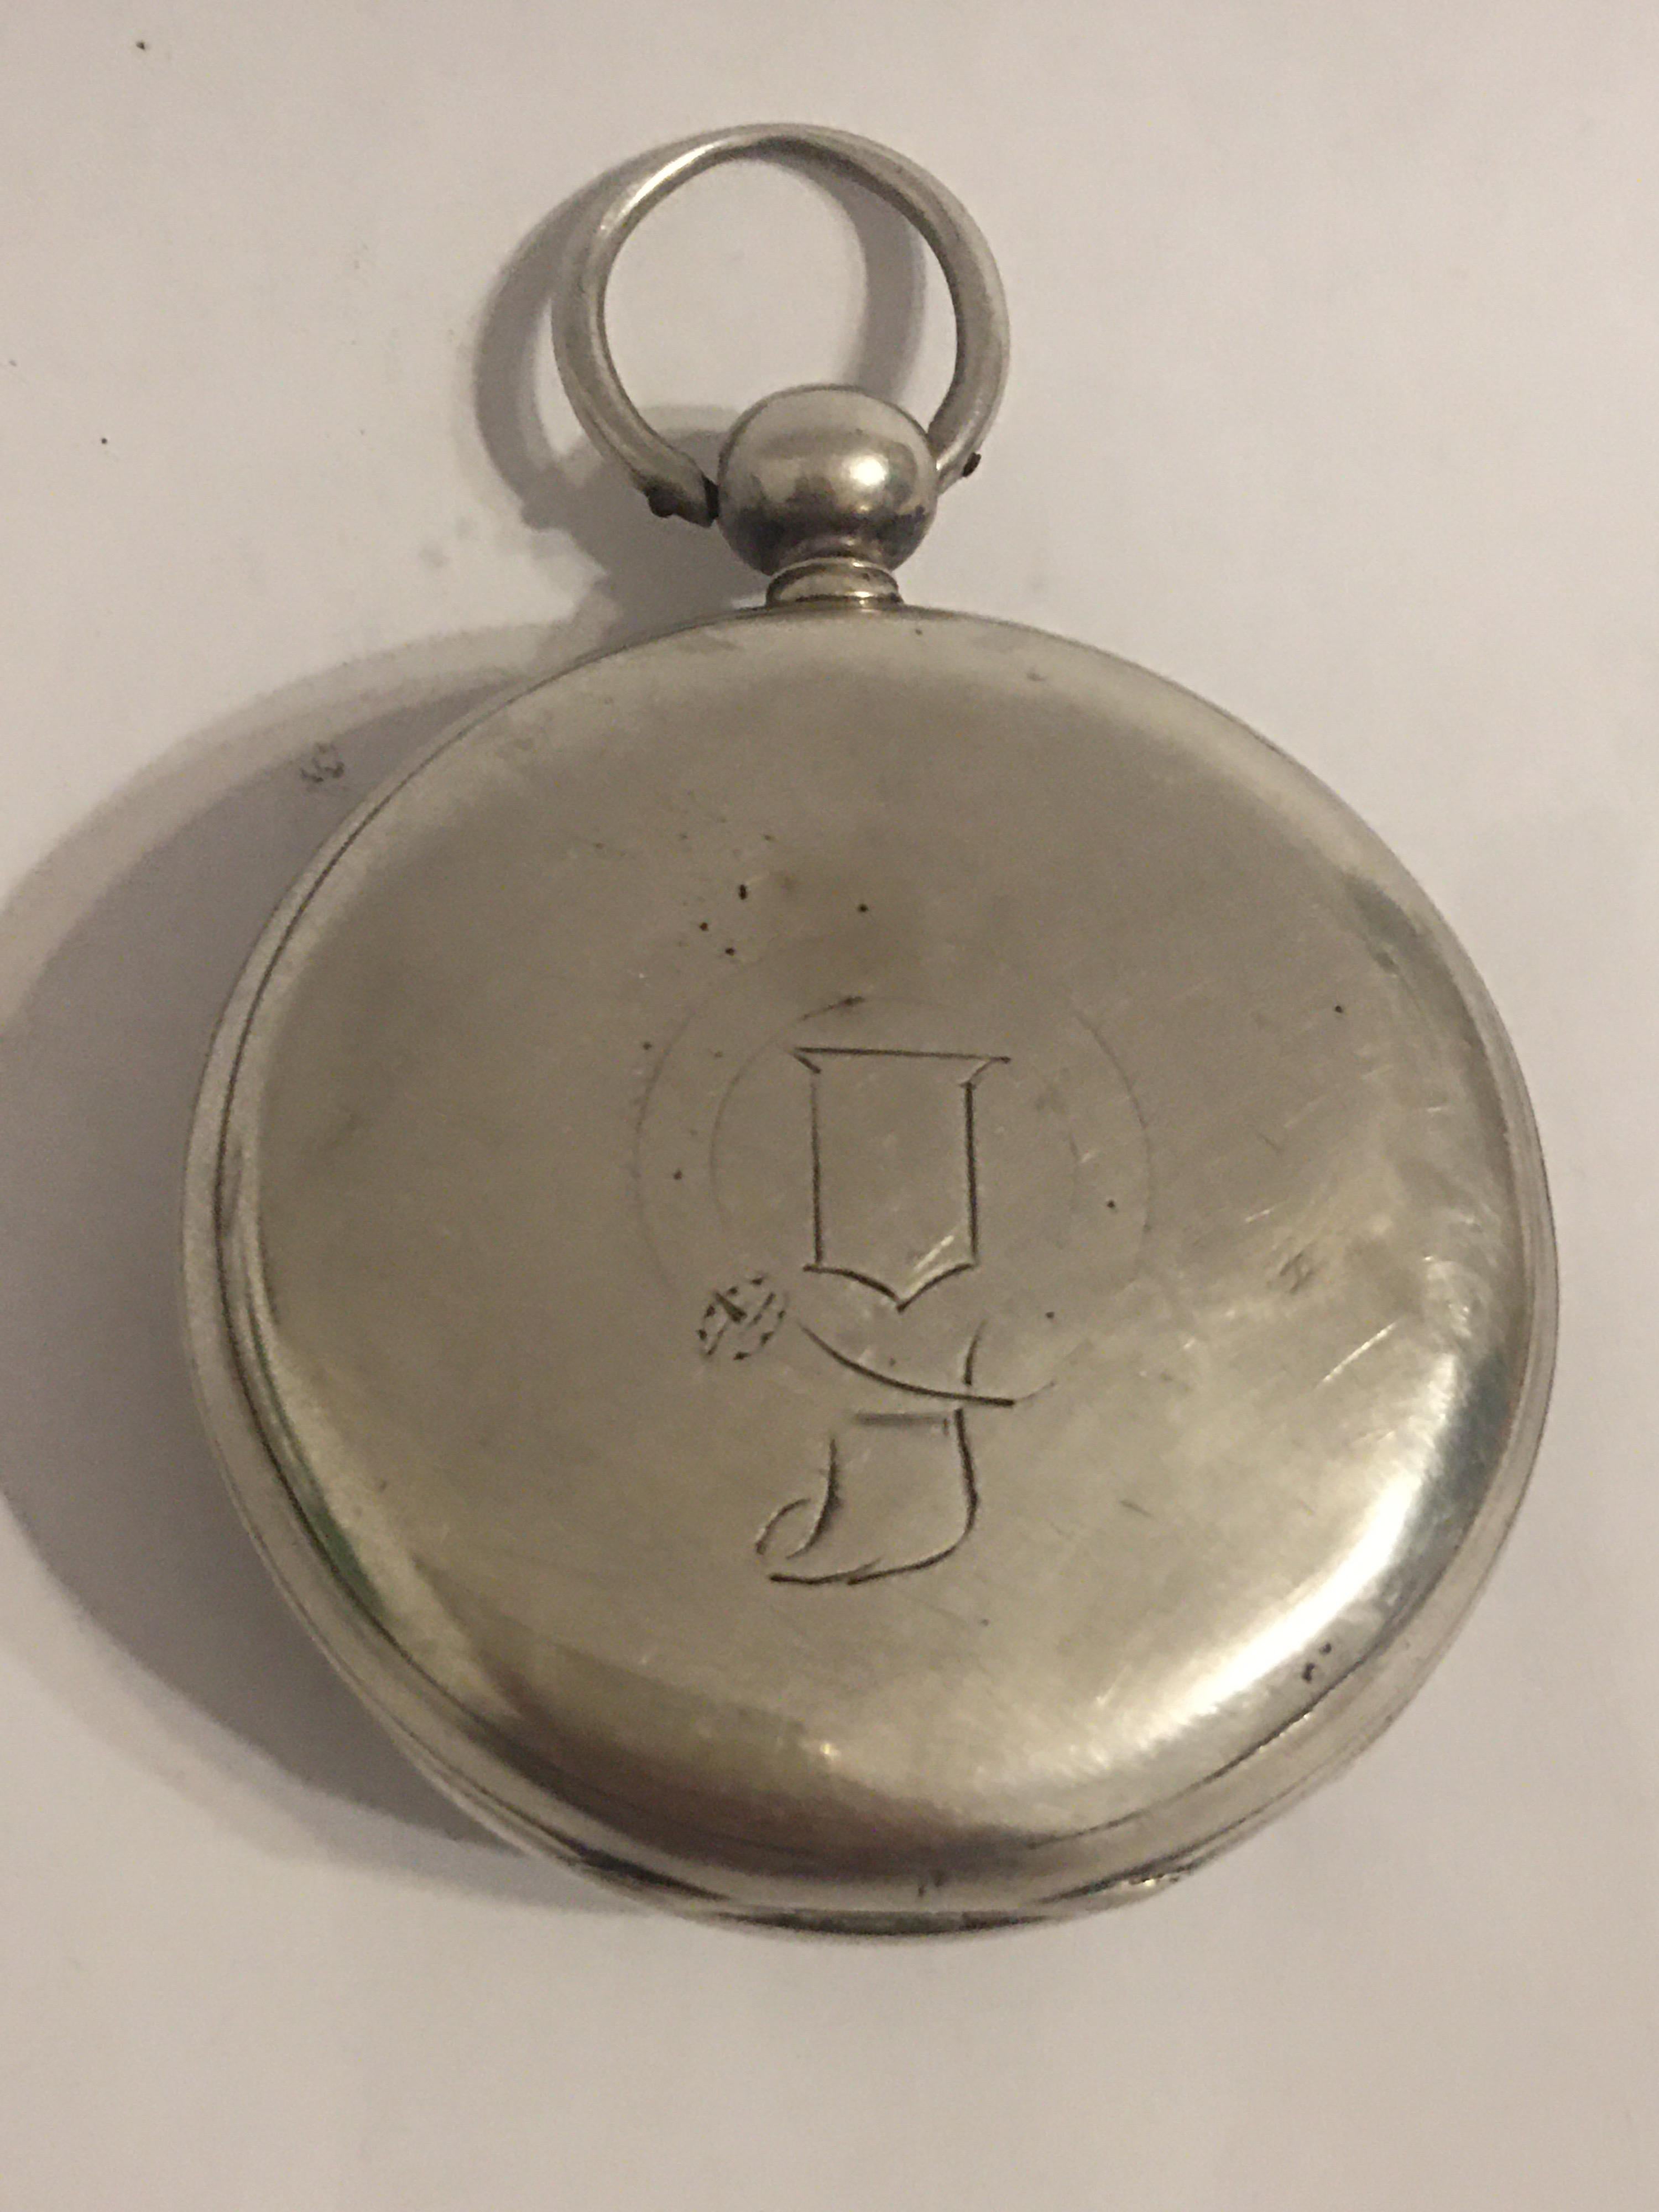 This Early and Extremely Rare Chinese Duplex Key-wind Pocket Watch is working and it is ticking well but I cannot guarantee its time accuracy. With its Jerking seconds (not sweep seconds). Visible tiny dents on the back and side of the watch case as